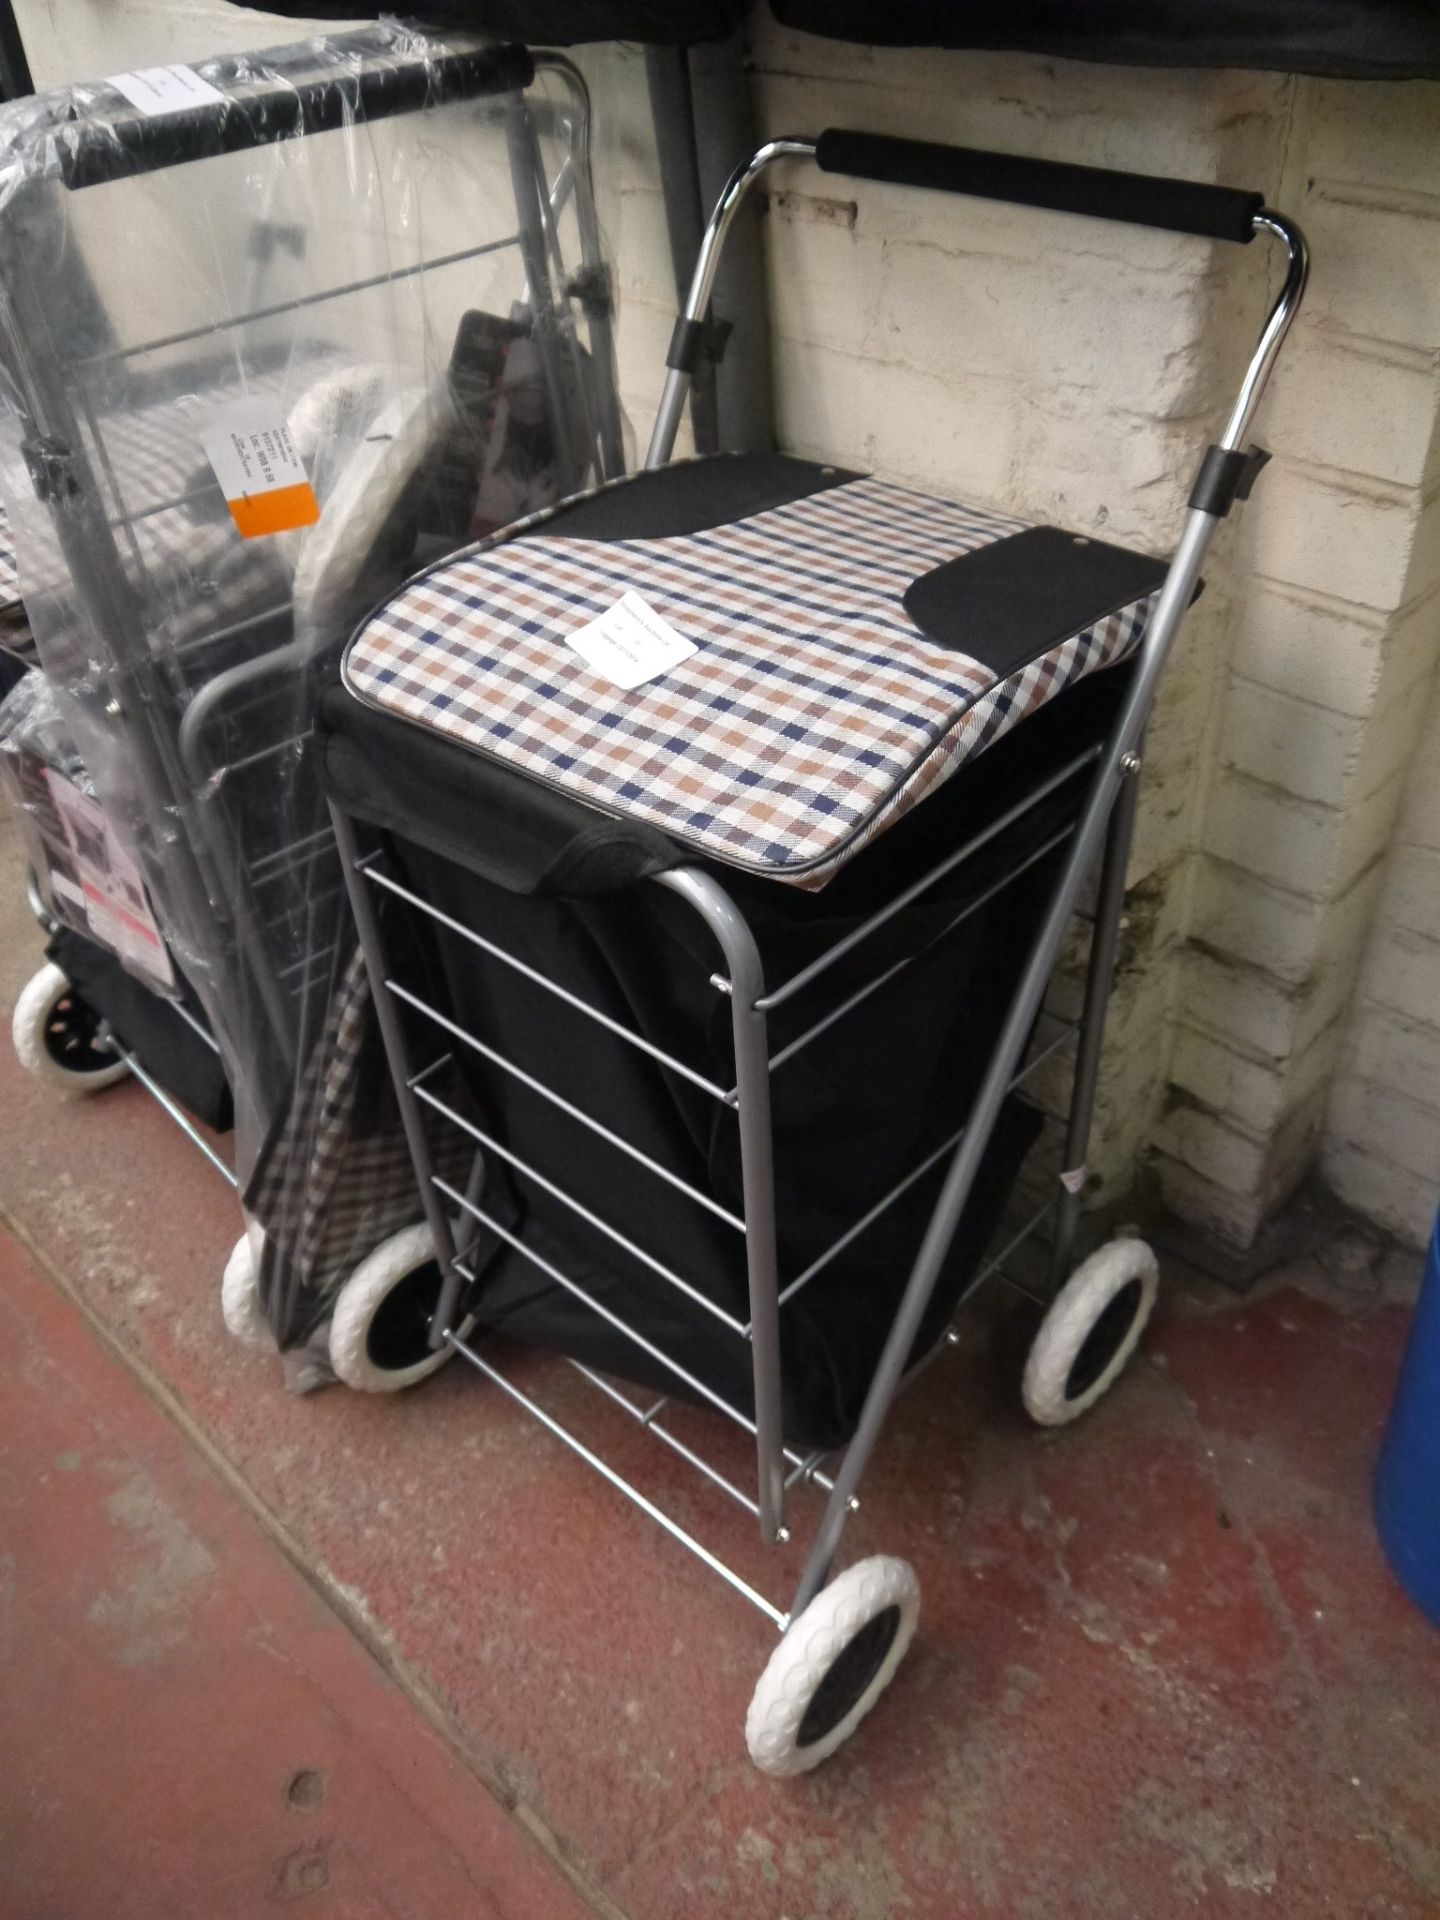 Eclipse 4 wheel shopping trolley, looks in excellent condition